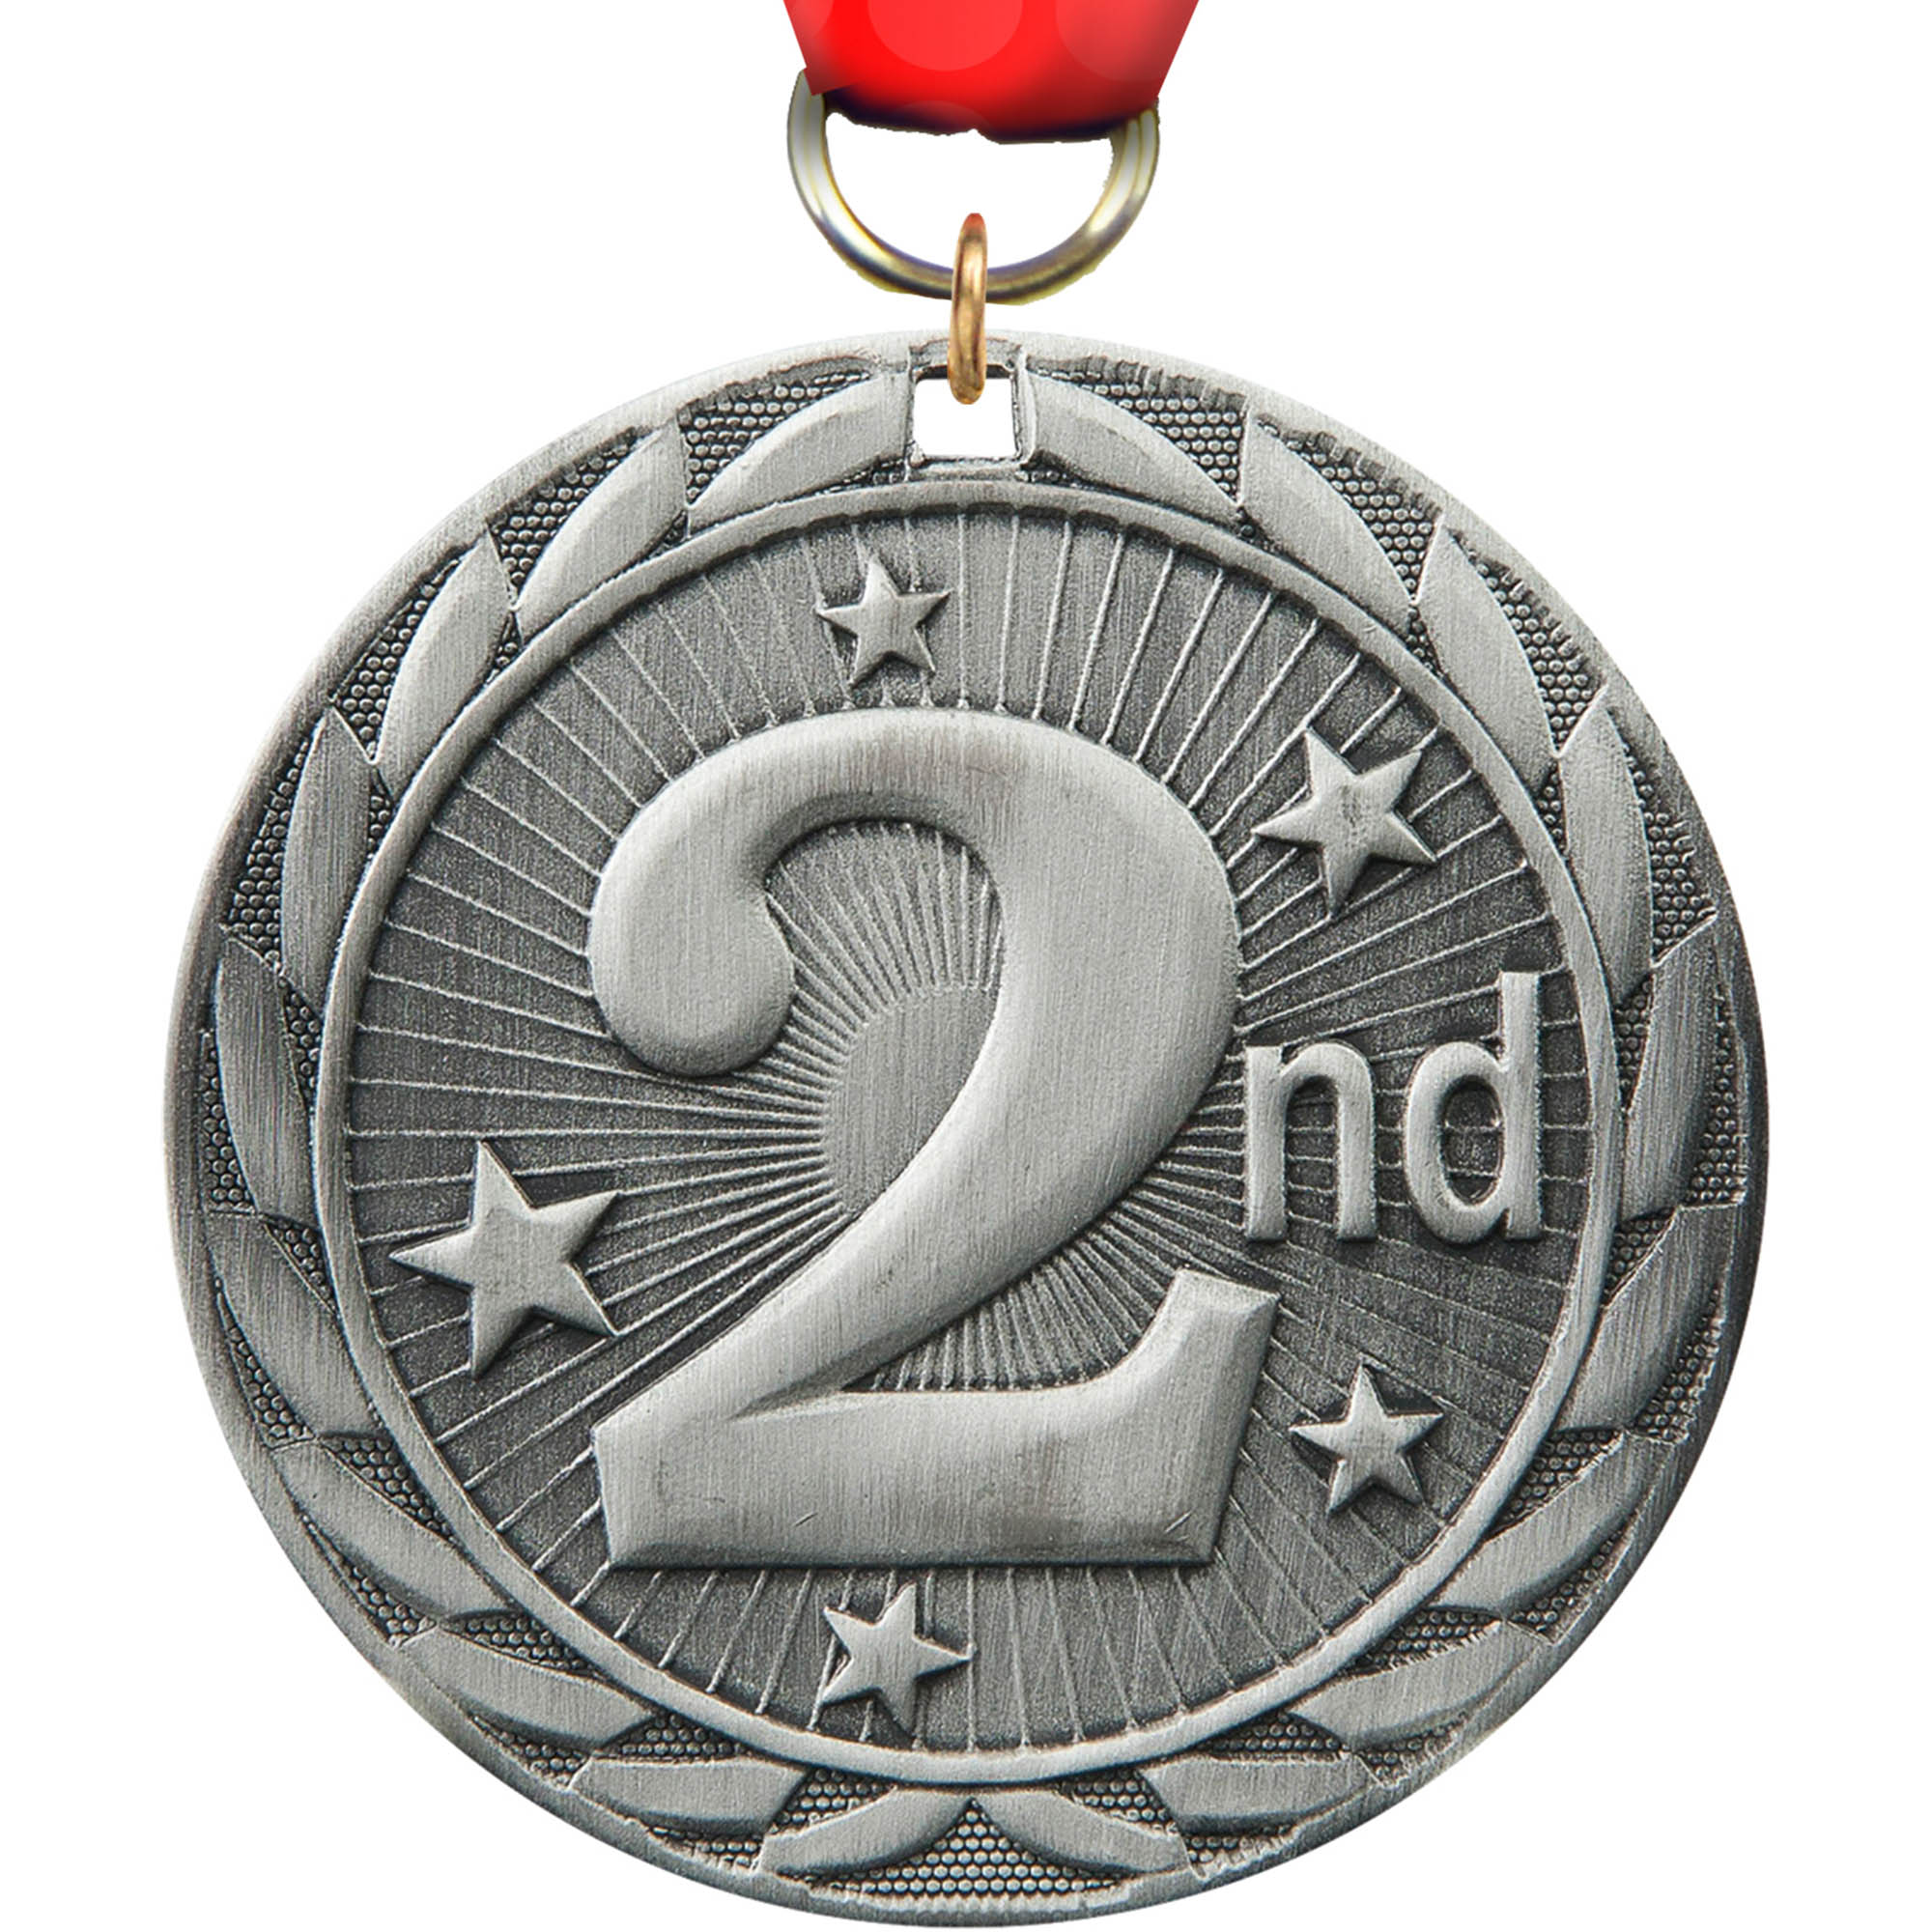 2nd Place FE Iron Medal